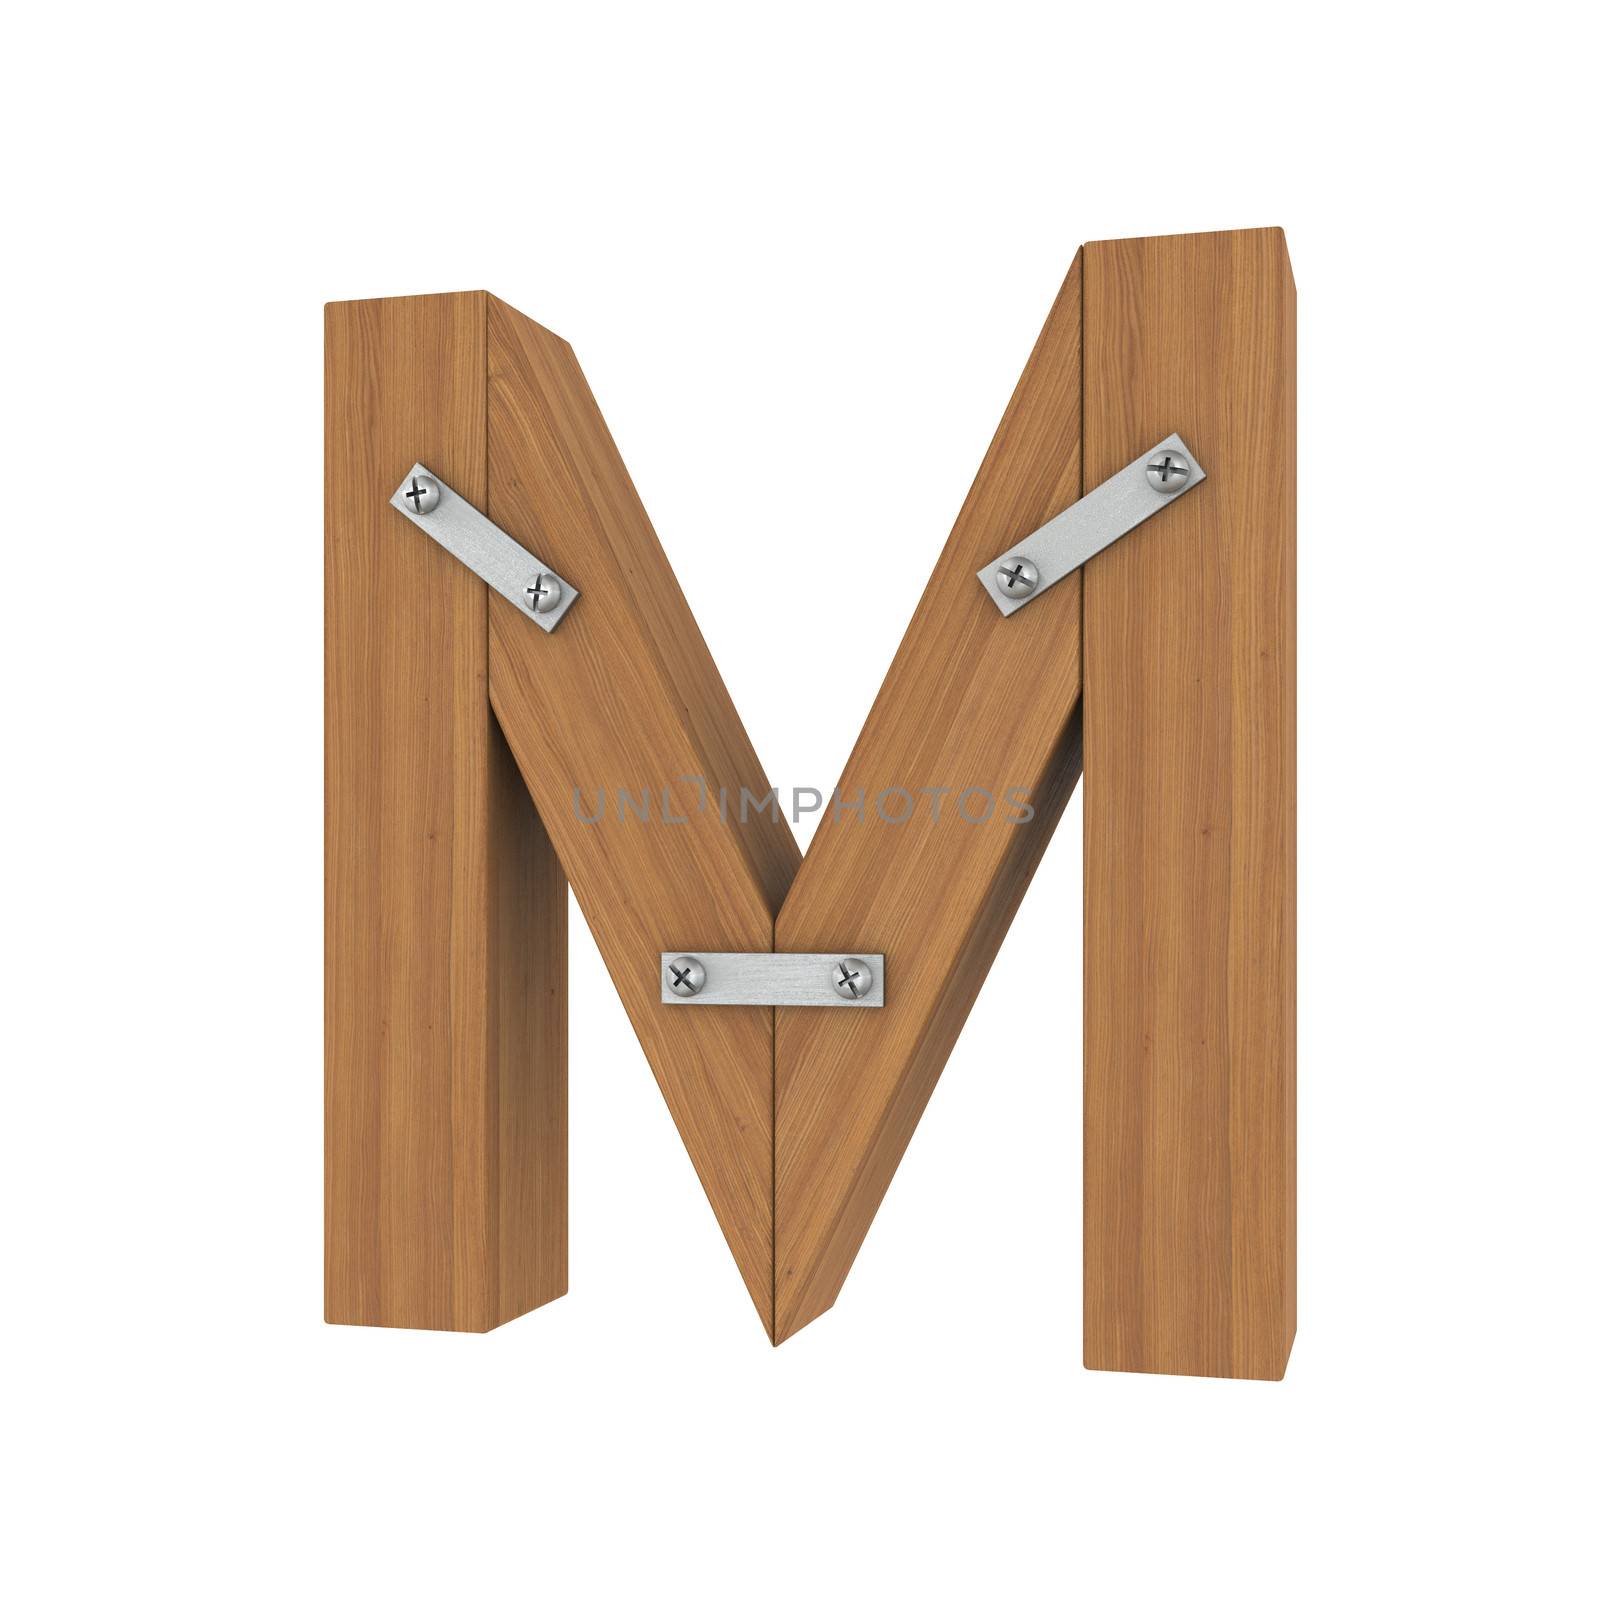 Wooden letter M by cherezoff